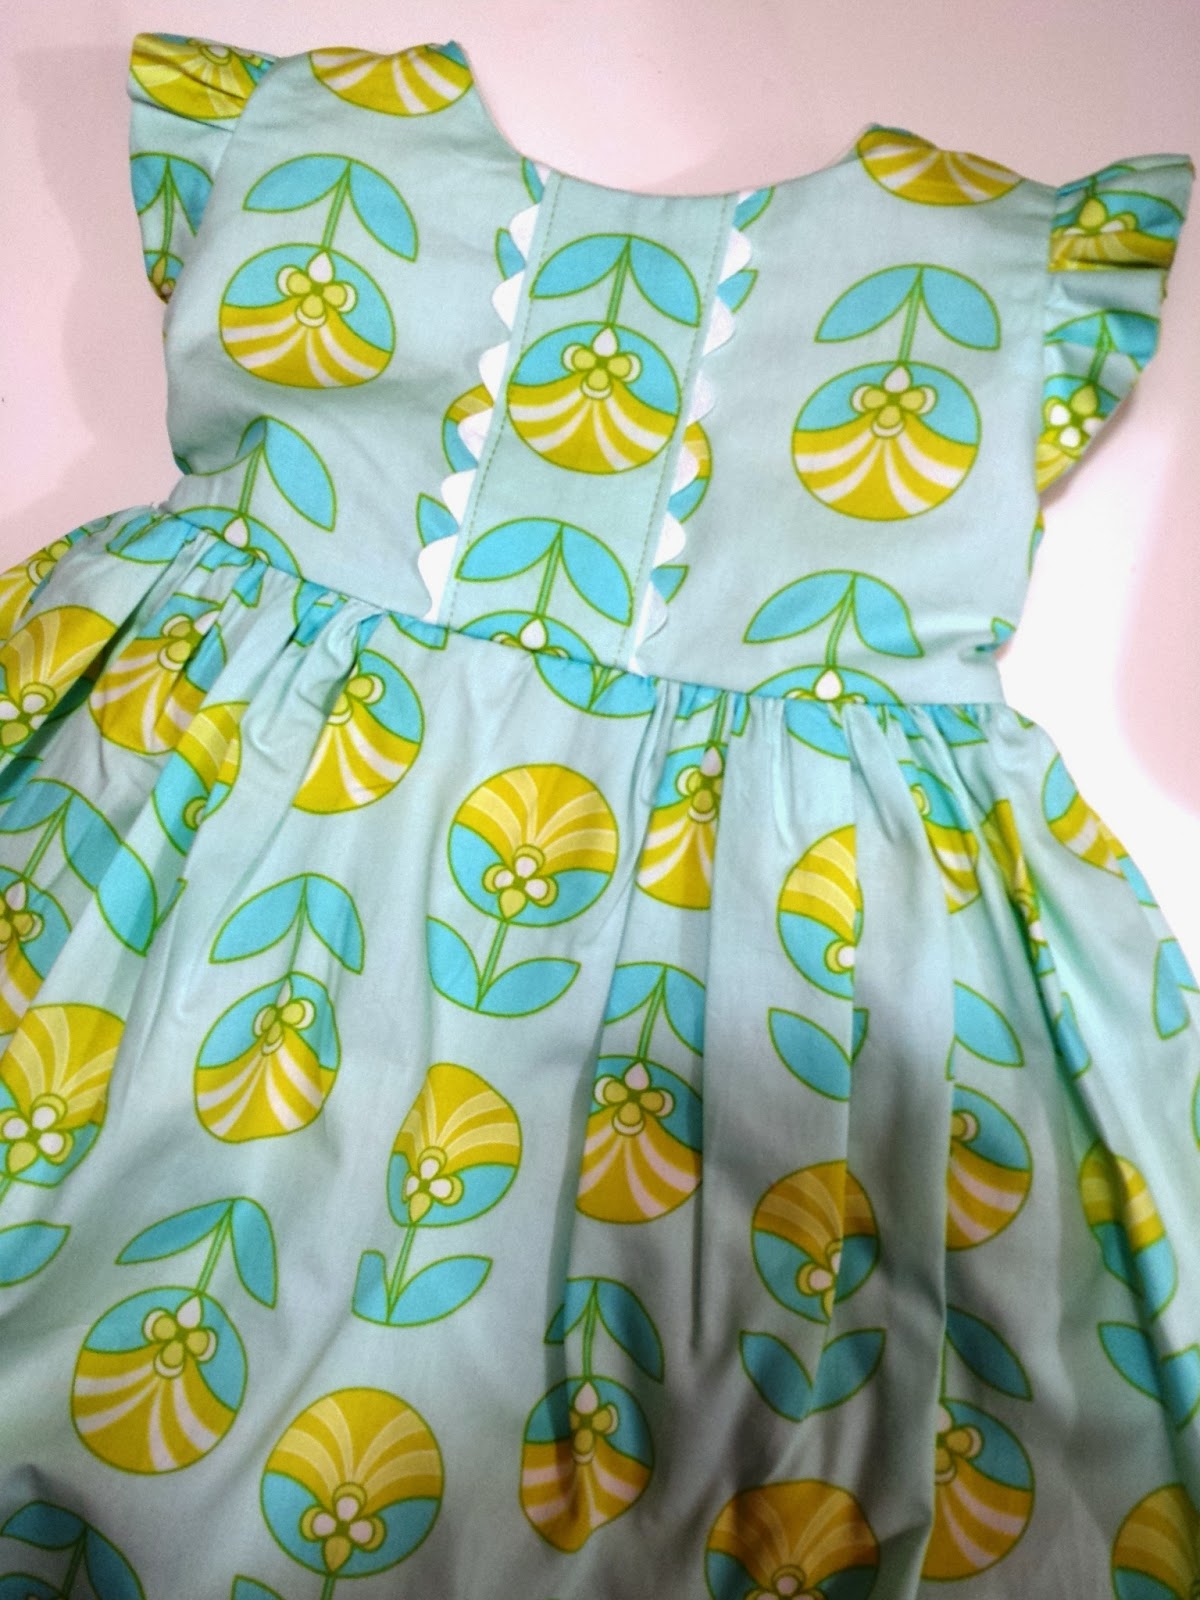 We Are Sew Happy!: The Birthday Dress by Debbie Brooke